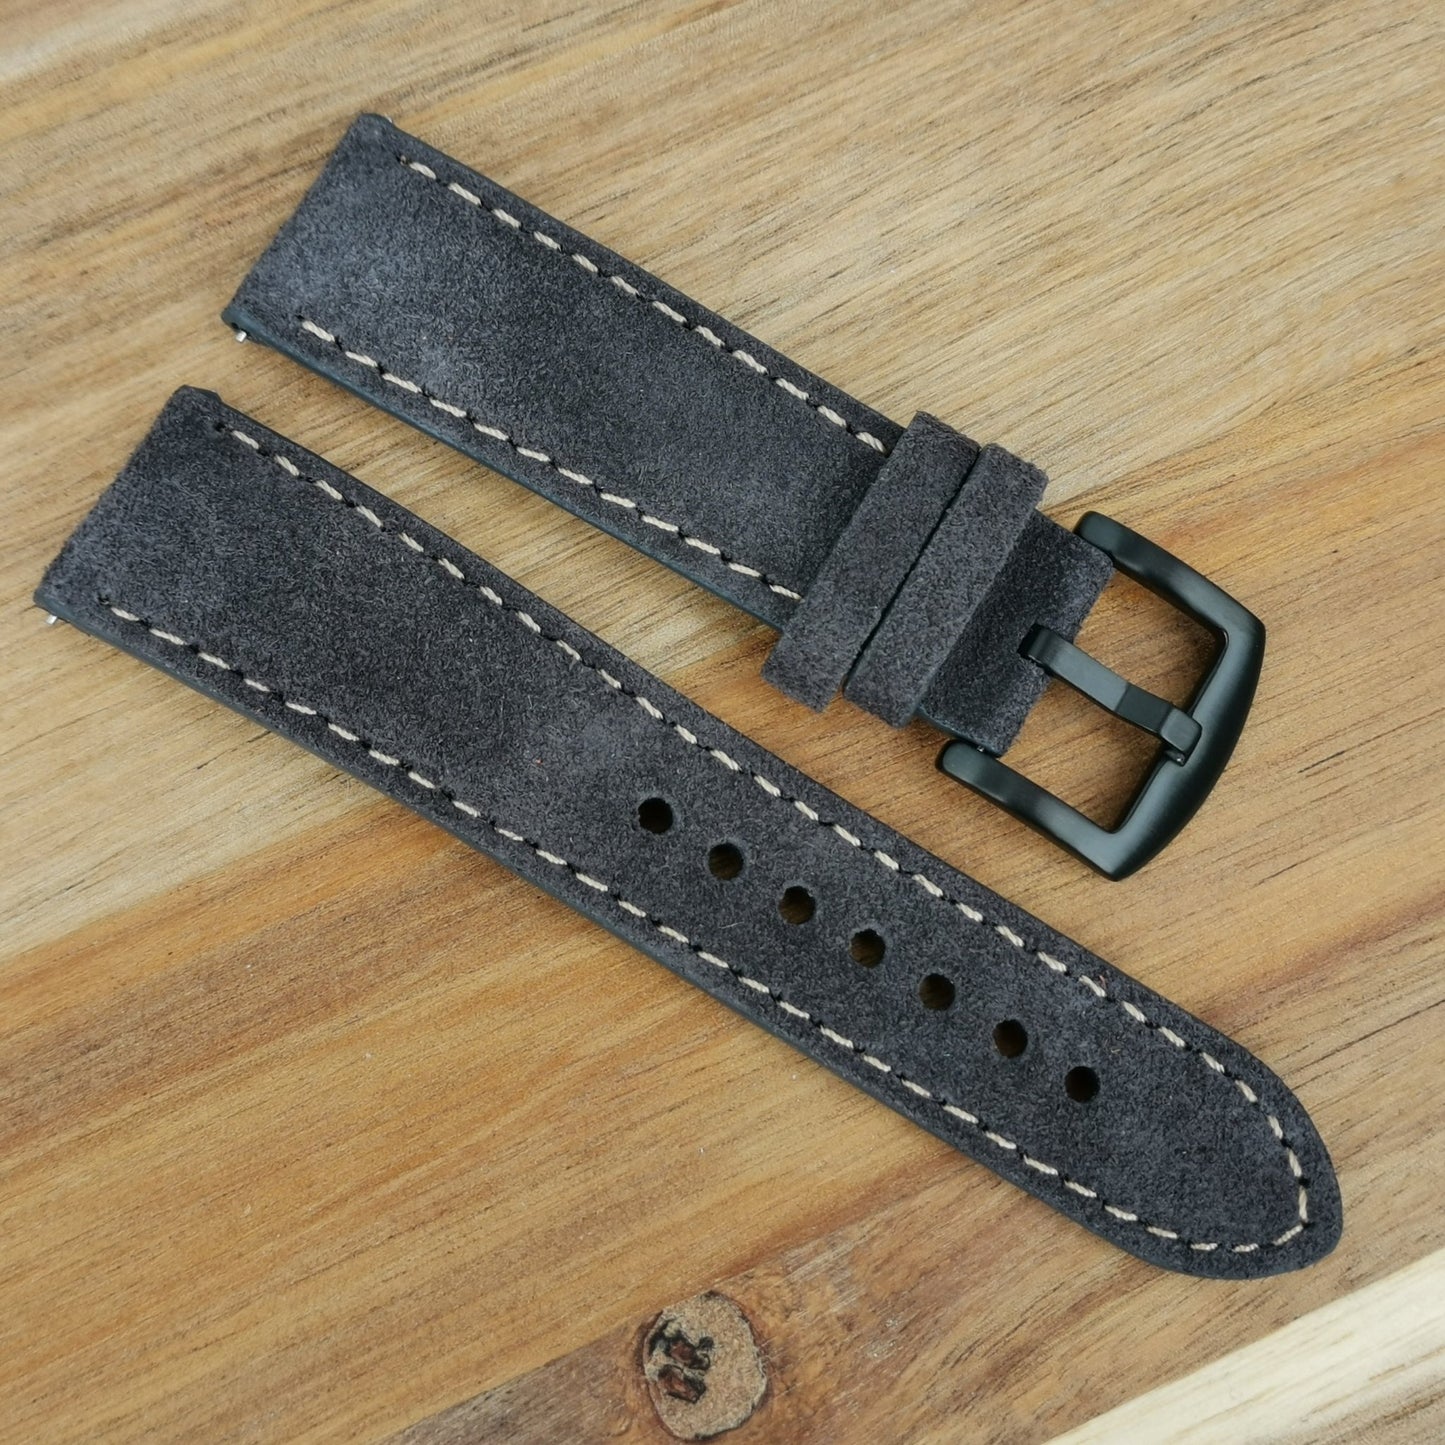 Paris gunmetal Grey suede watch strap. PVD black stainless steel buckle. 18mm, 20mm, 22mm, 24mm. Watch And Strap.